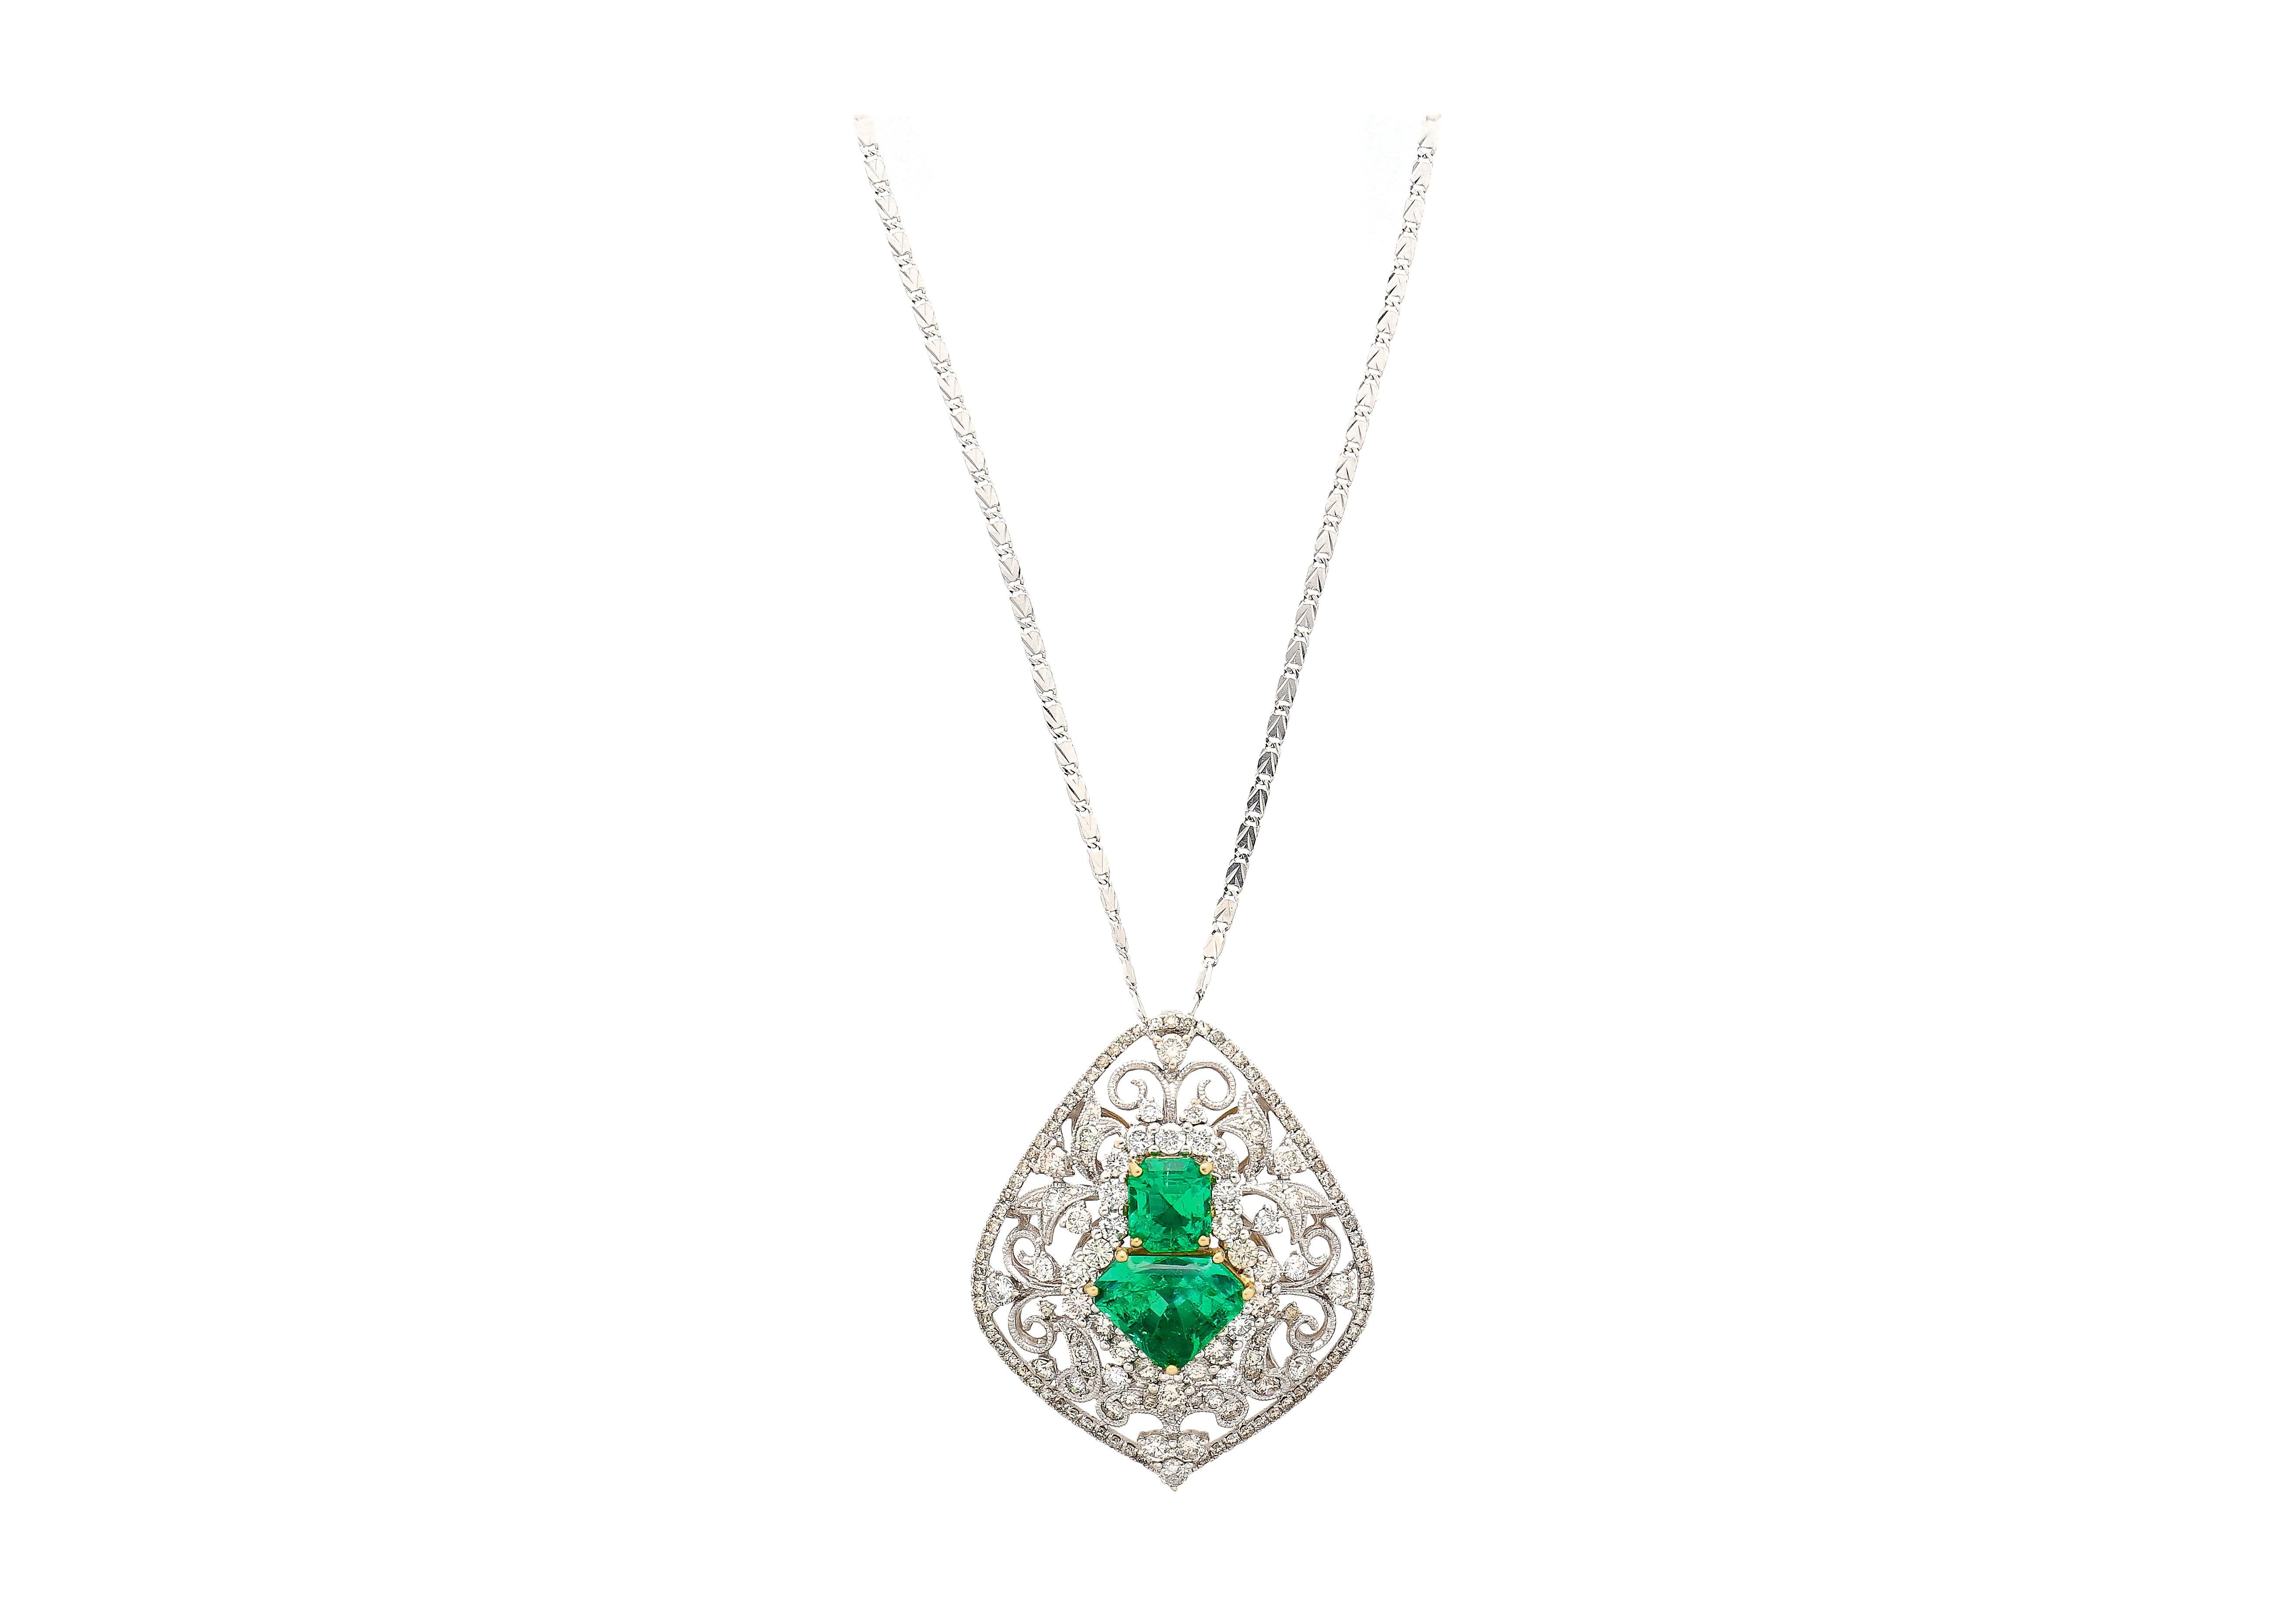 Emerald Cut Vintage Carved 18K White Gold Pendant Necklace With Shield Cut Emeralds For Sale